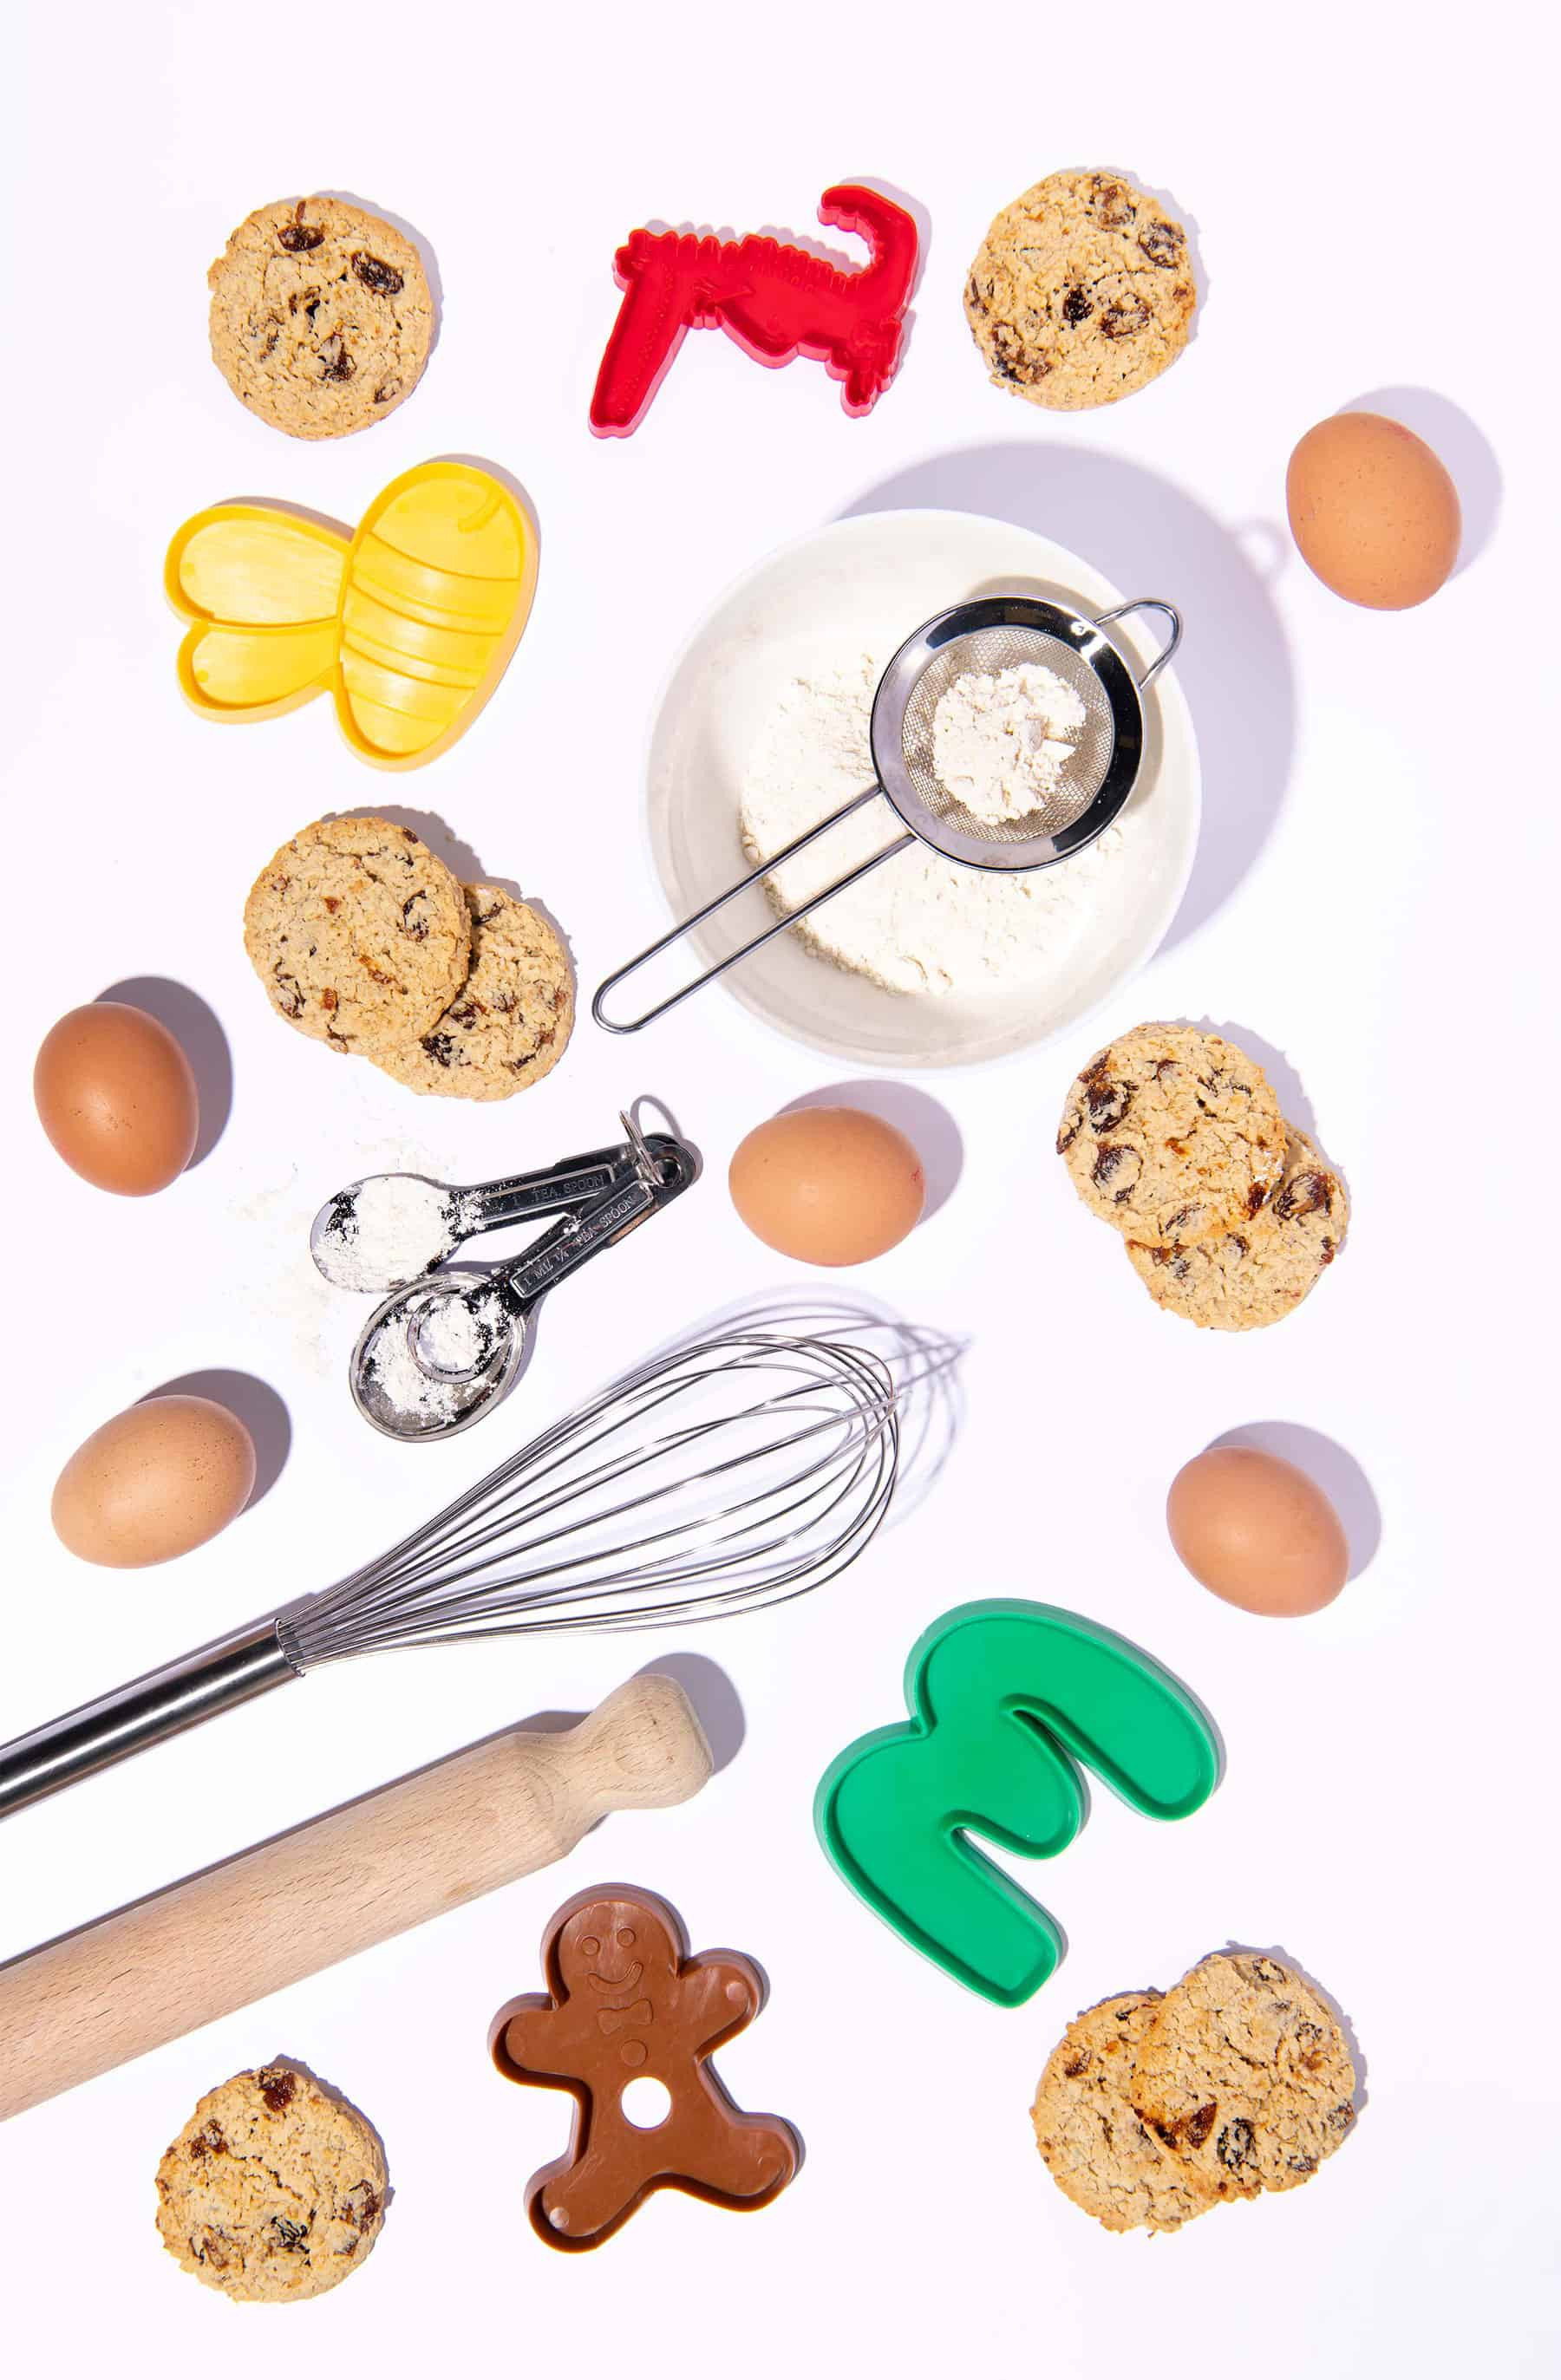 image of cookies and baking equipment made by gcp